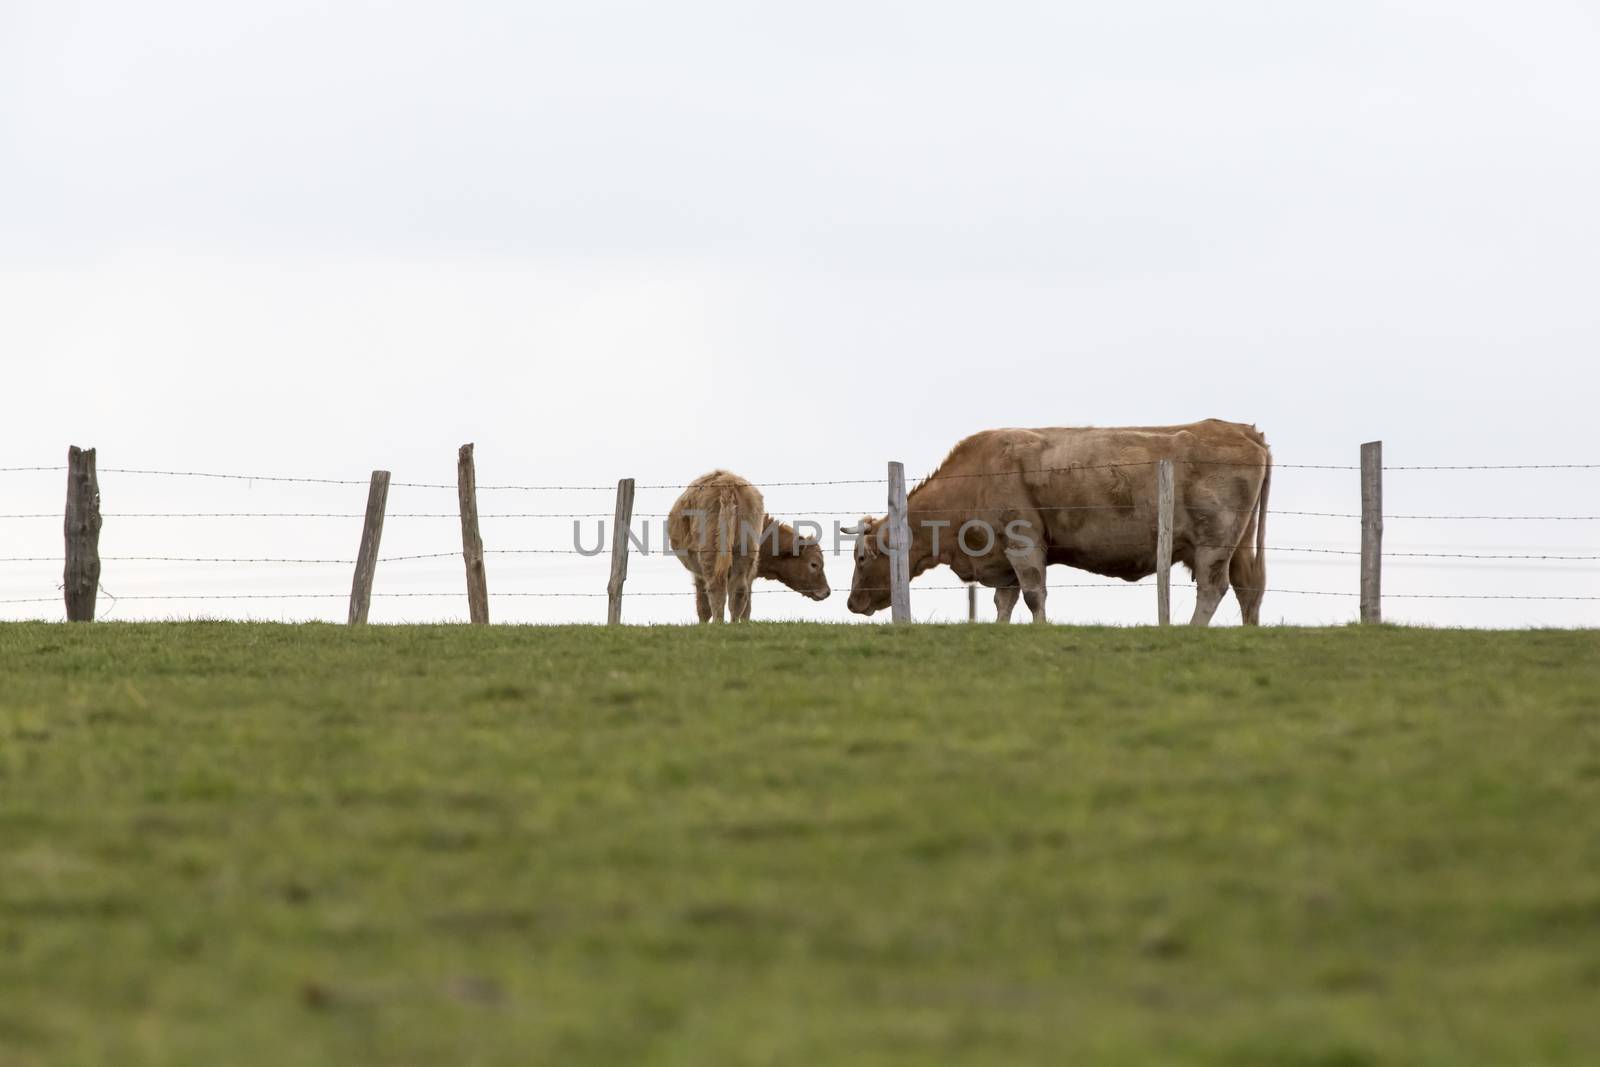 Cow grazing on dirty pasture agriculture crisis